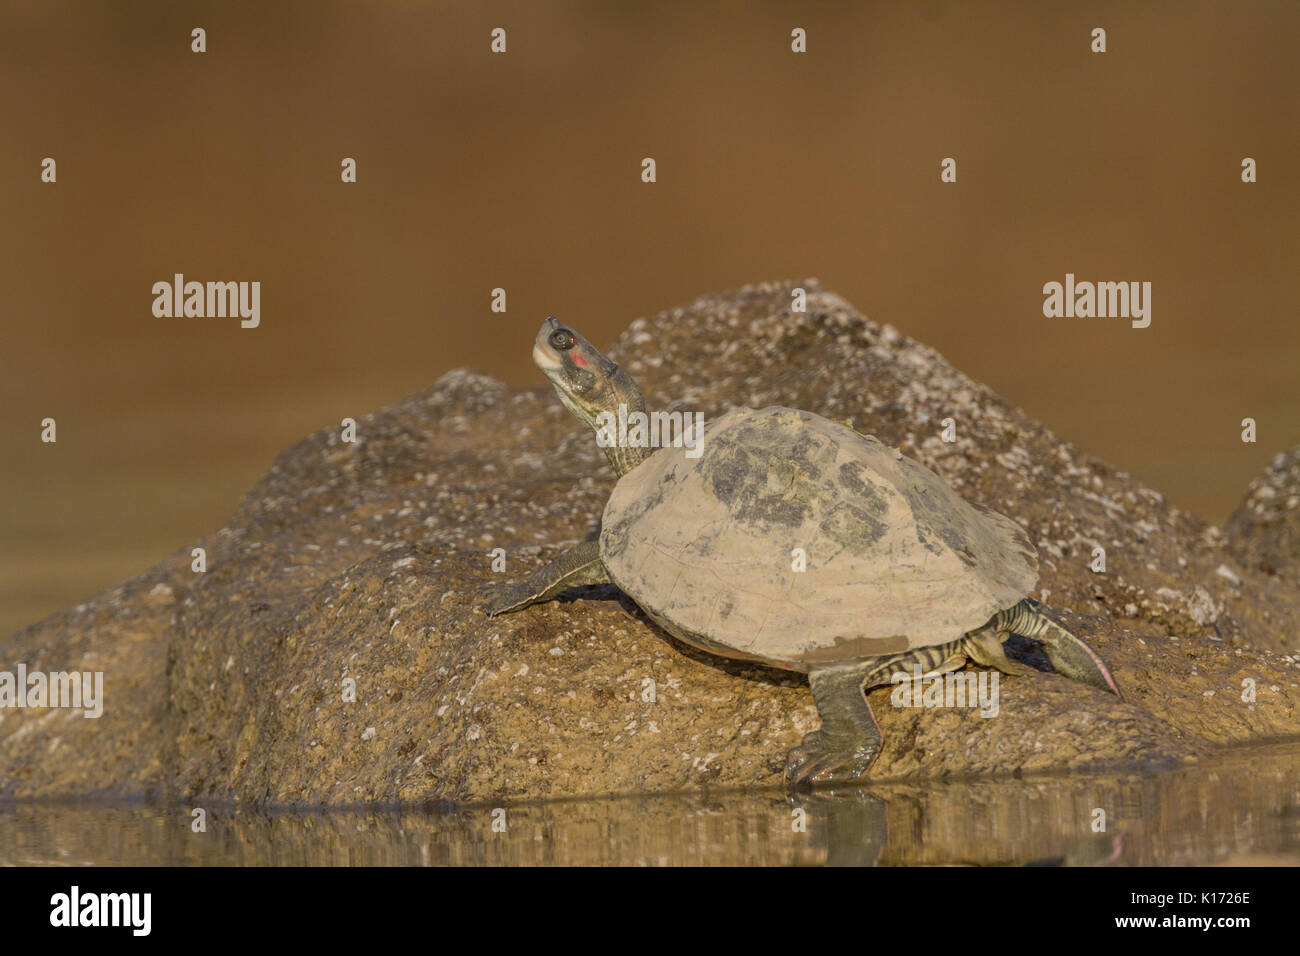 Indian Red-Crowned Roof Turtle (Batagur kachuga) in the Chambal River near Dholpur, Rajasthan. Stock Photo